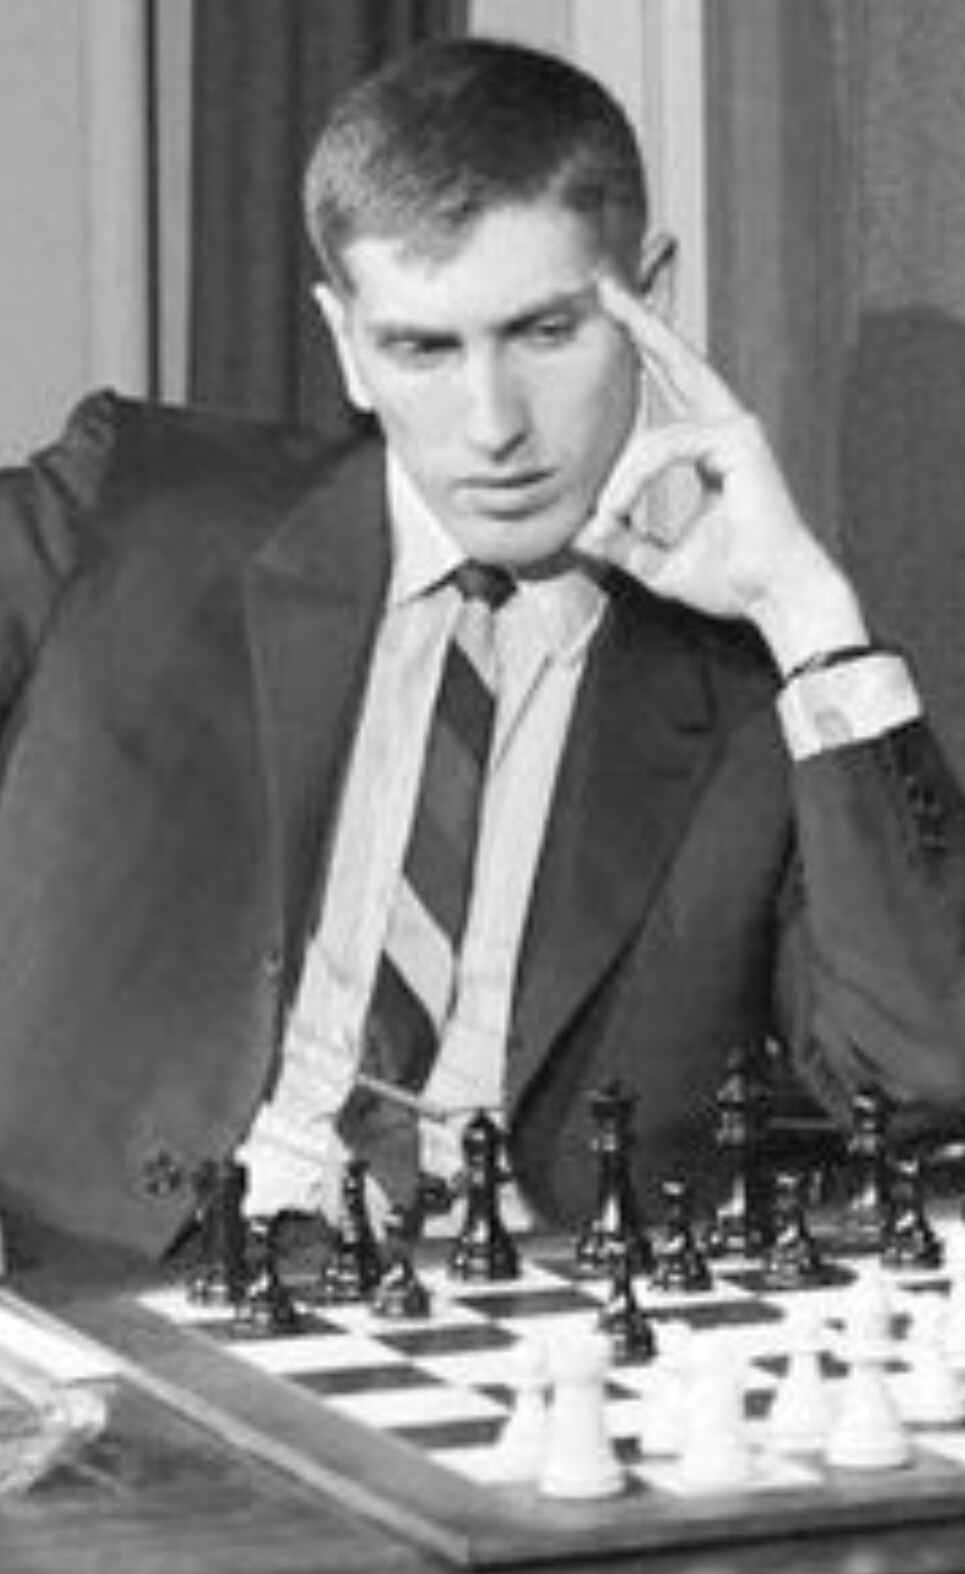 Chess champion Bobby Fischer working on his moves during a subway